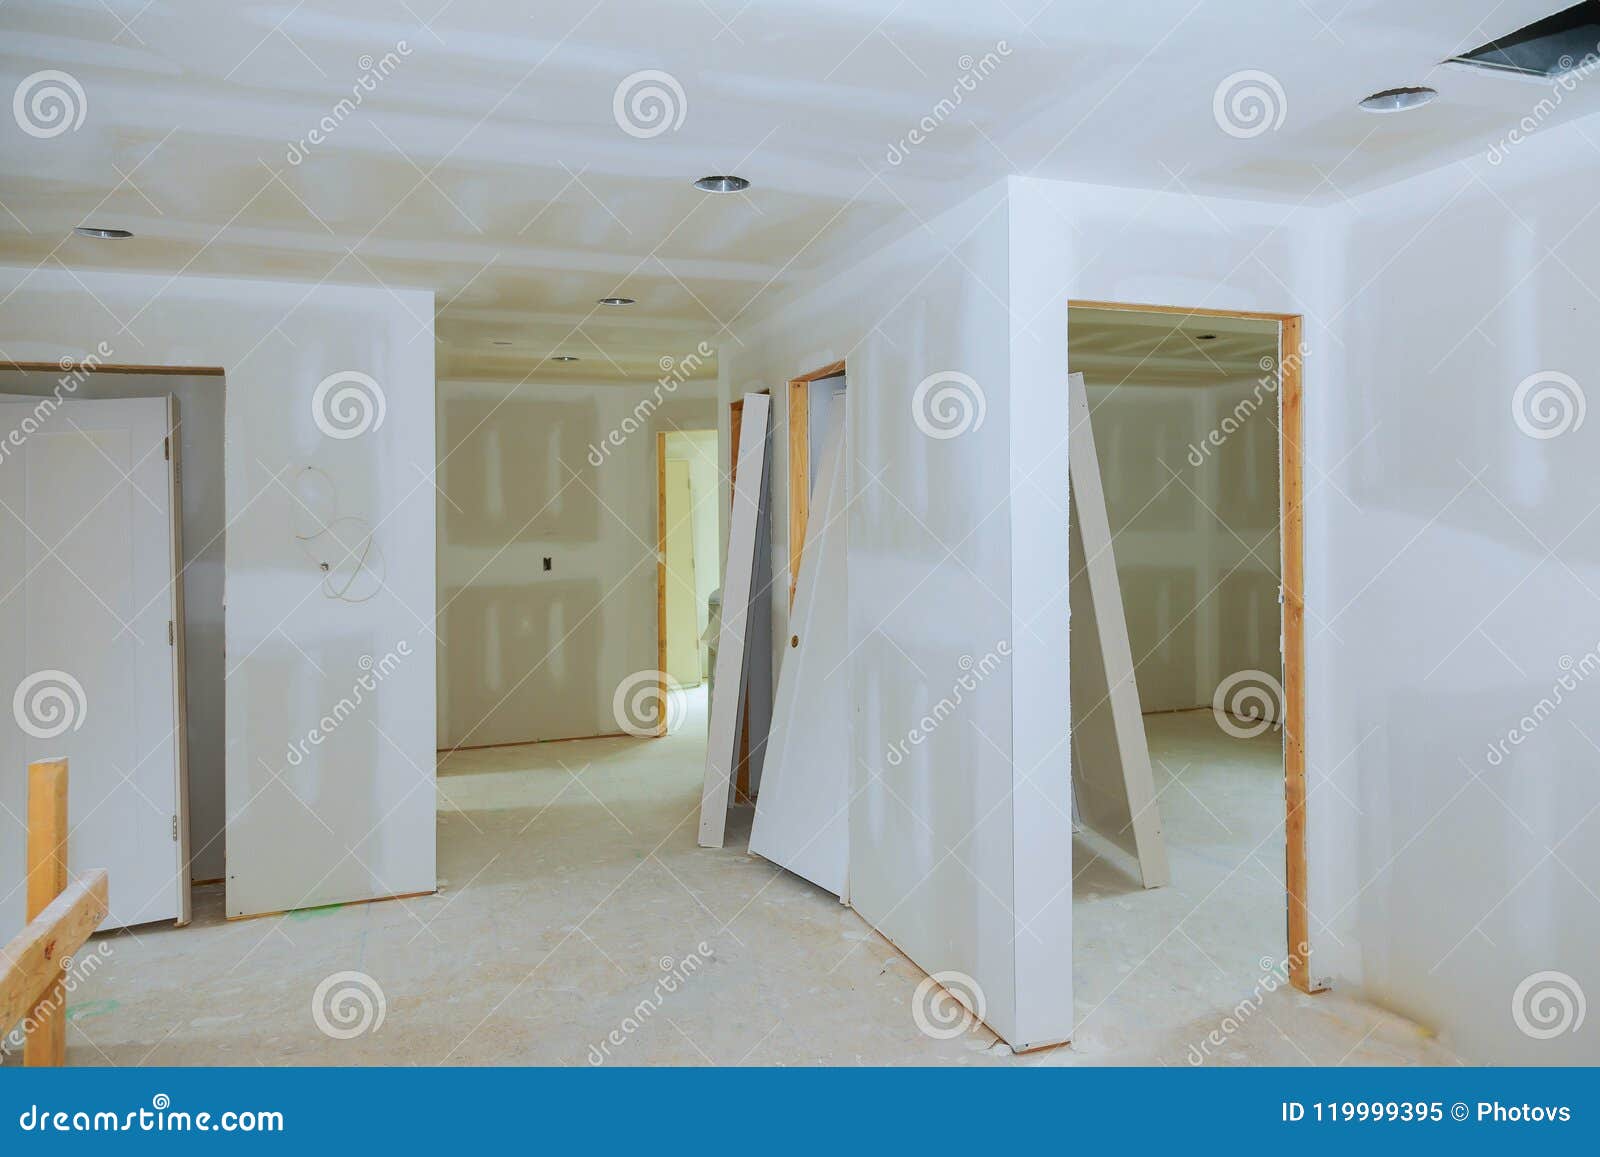 new construction of drywall plasterboard interior room